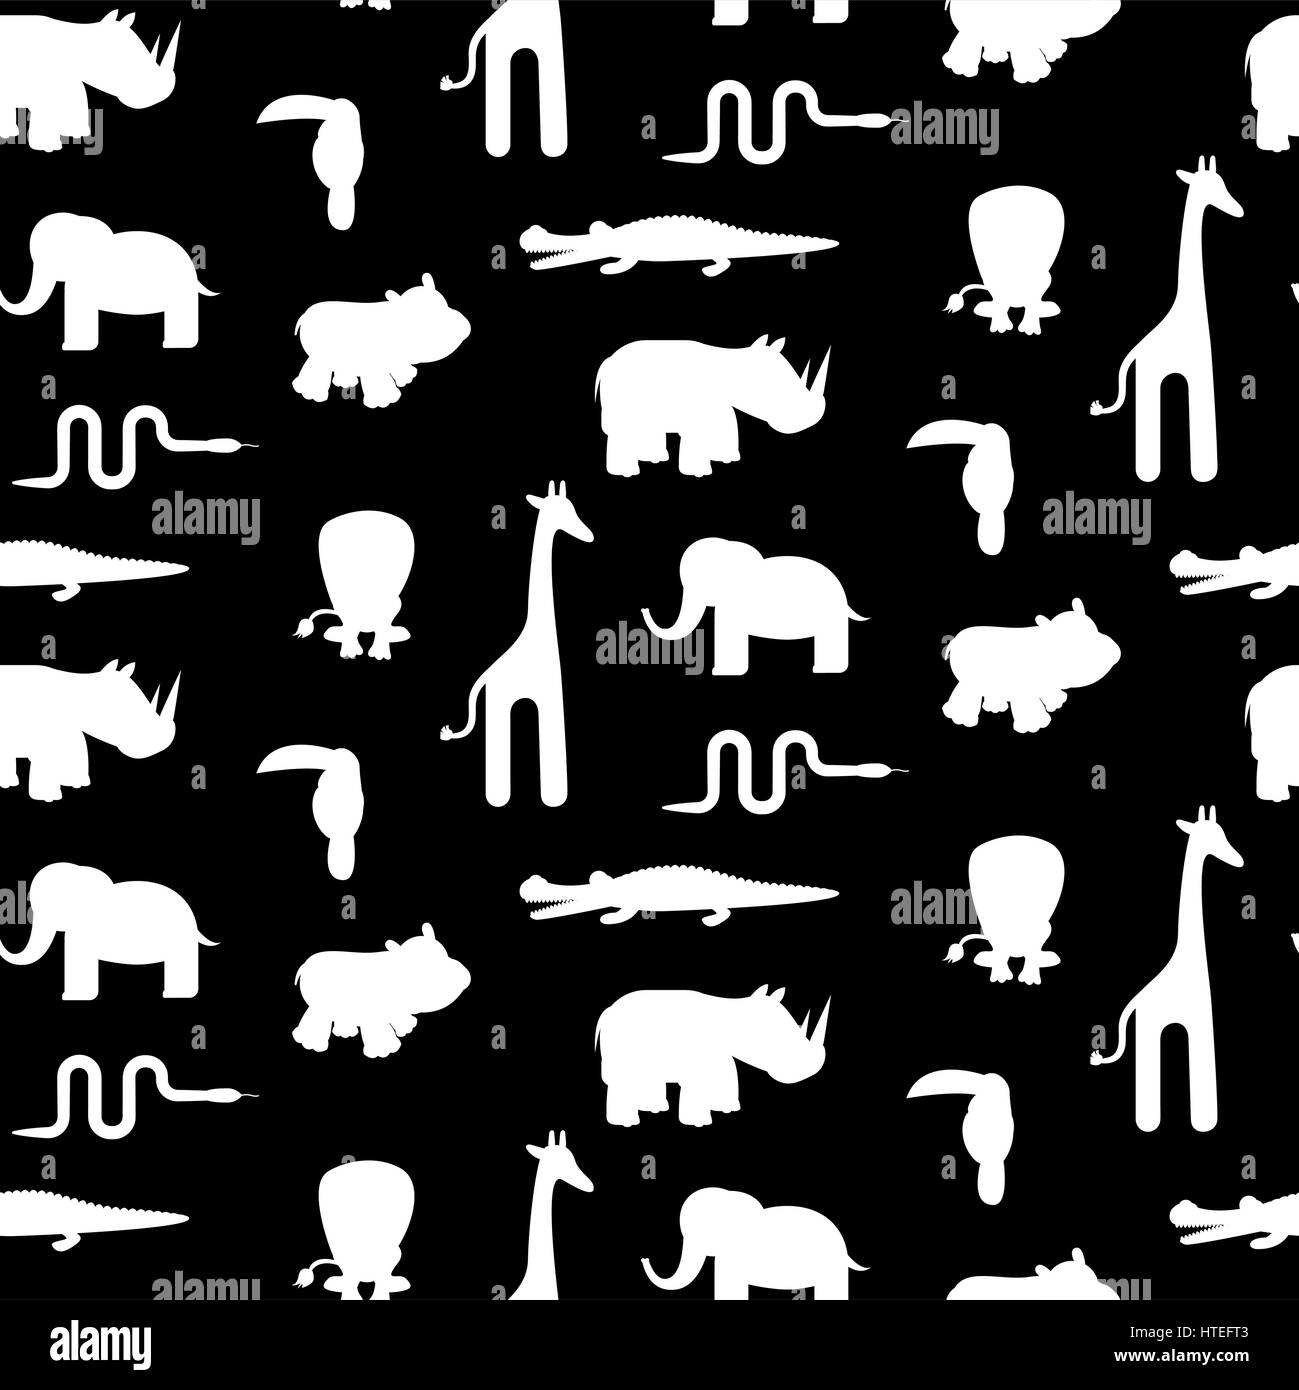 Black and white animal silhouettes seamless pattern vector. Monochrome giraffe, lion, hippo, crocodile, toucan and snake on white background. Stock Vector